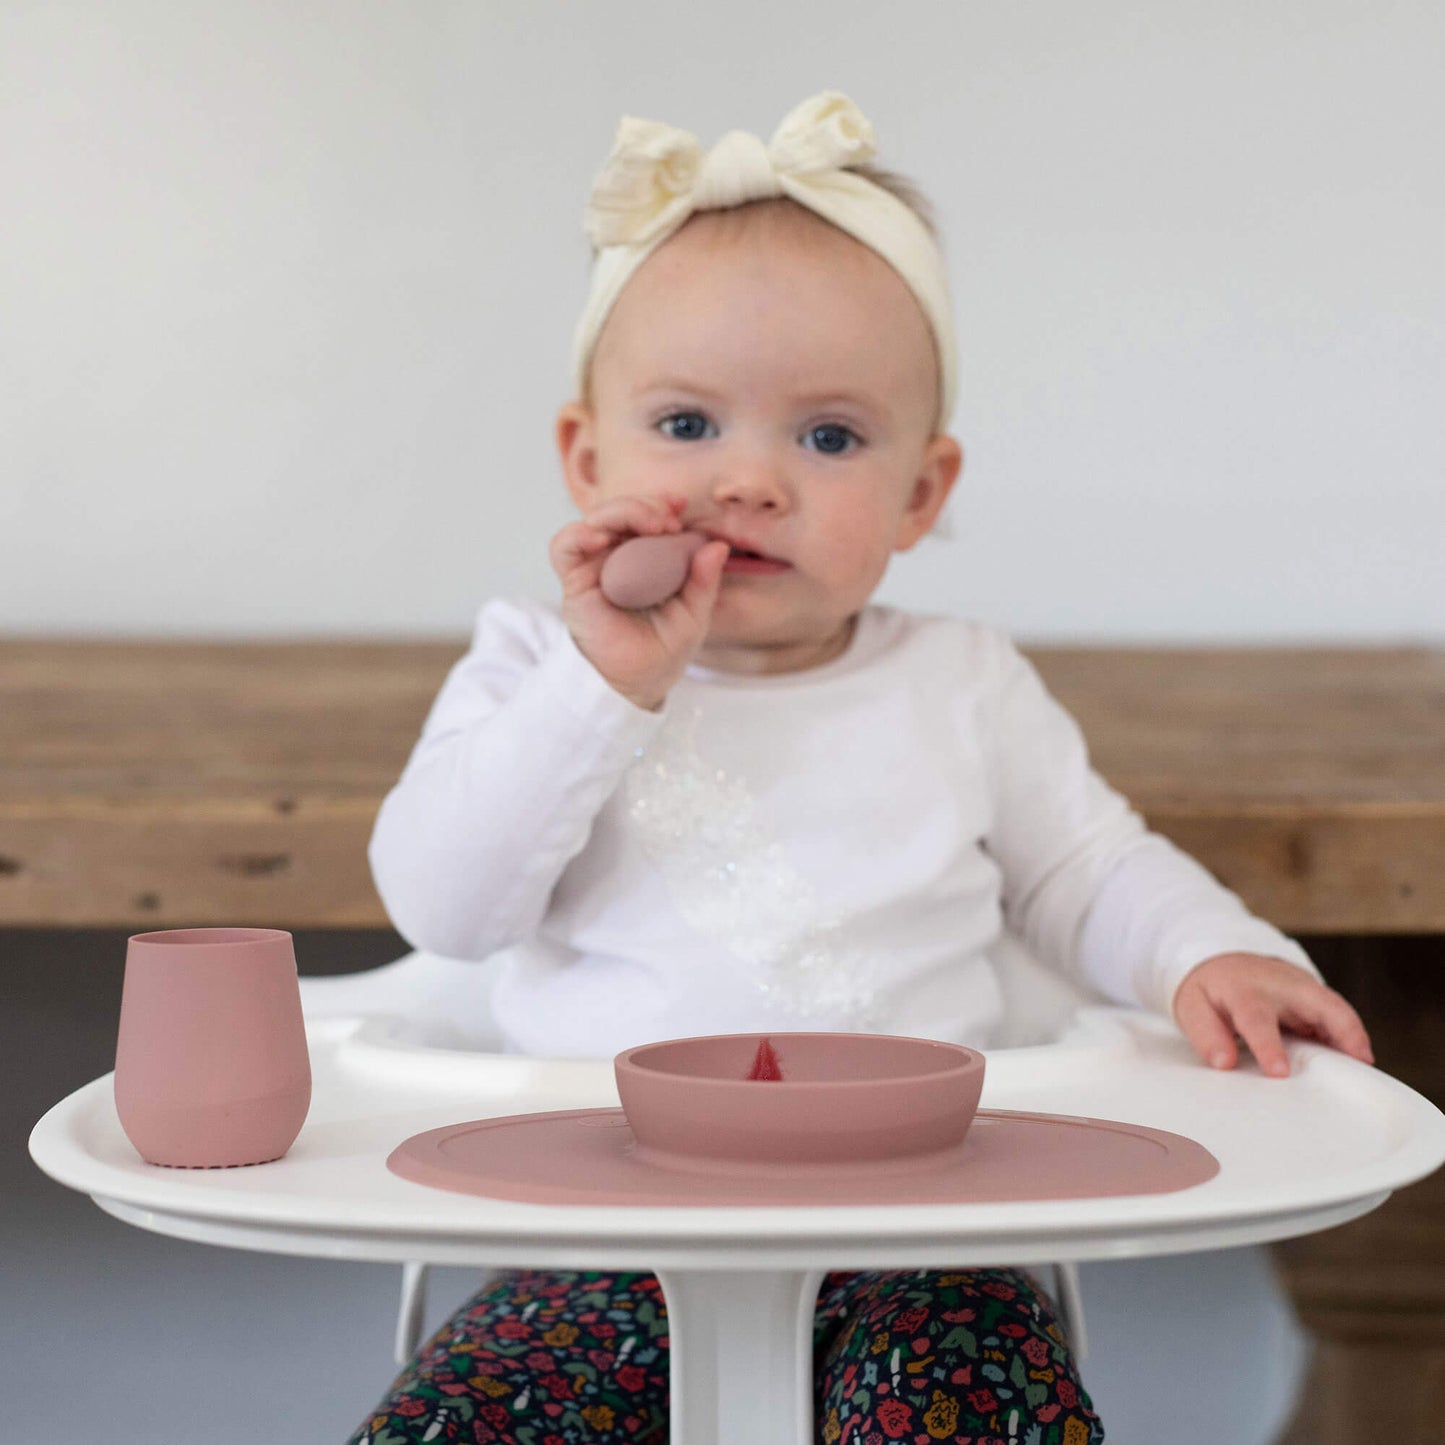 The Tiny Bowl by ezpz / Silicone Bowl for Babies / Fits on High Chairs